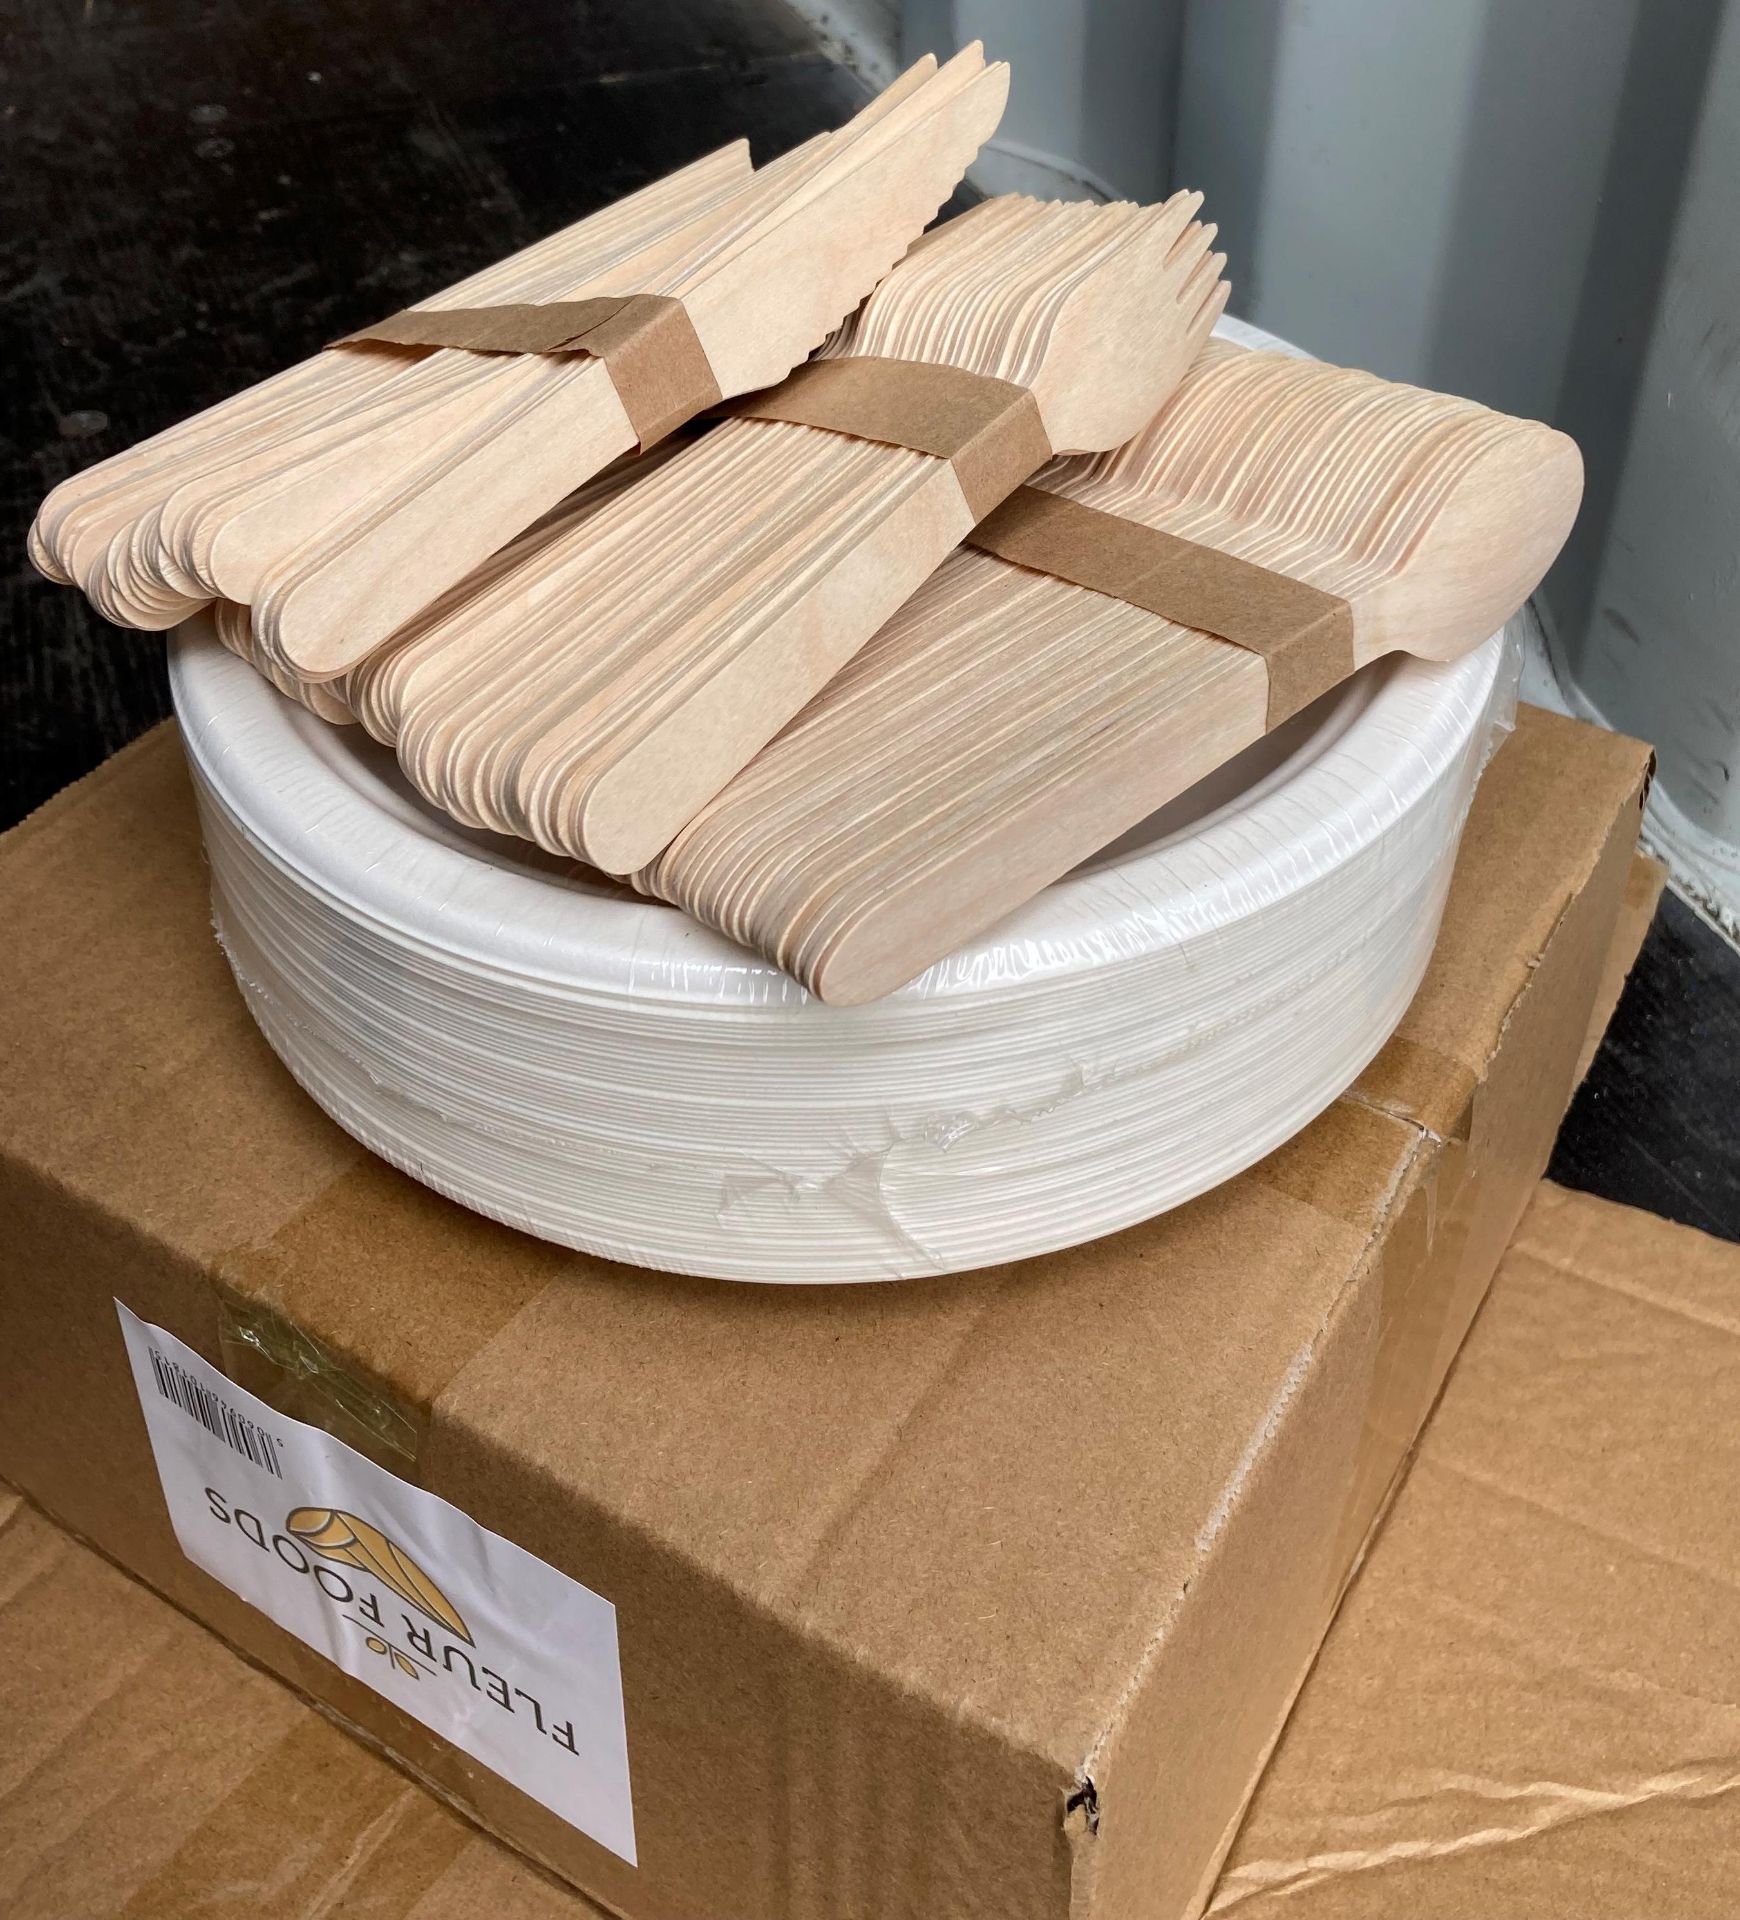 24 x packs and contents of approximately 60 x paper plates, sets of wooden knives, - Bild 2 aus 5